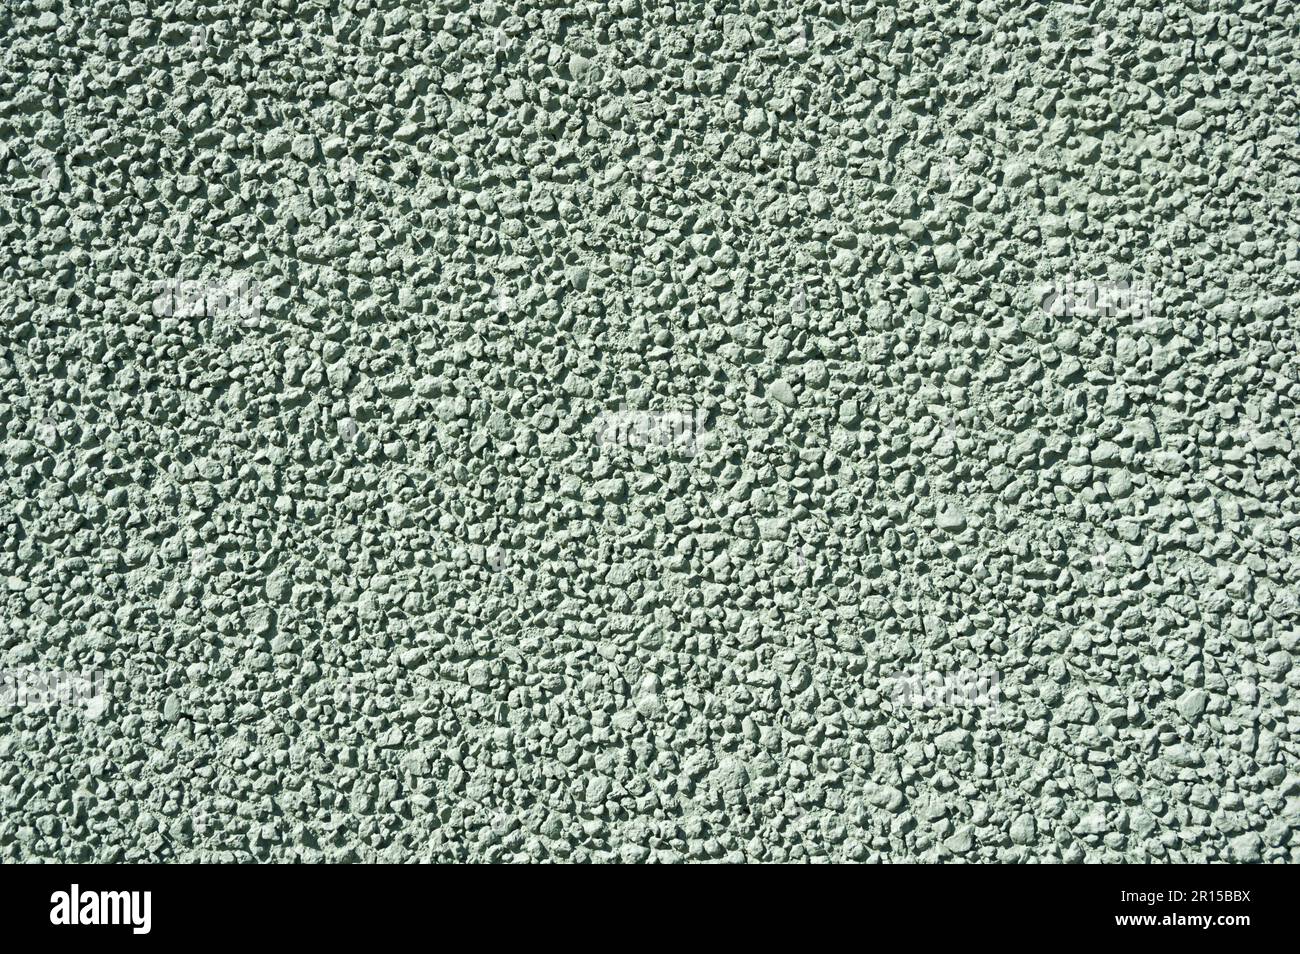 textured light green stucco wall background texture Stock Photo